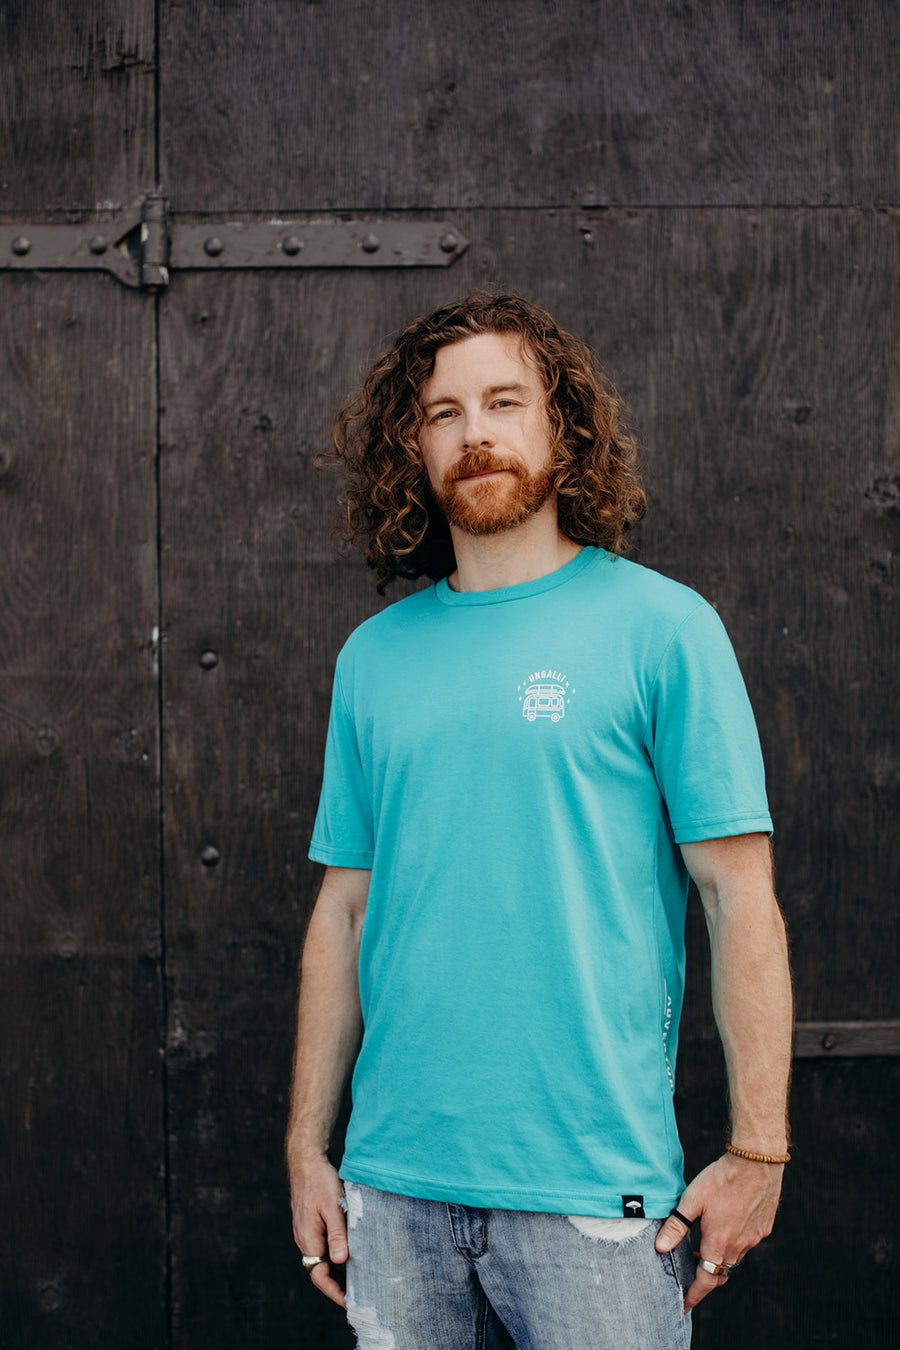 Men's organic teal t-shirt with white details